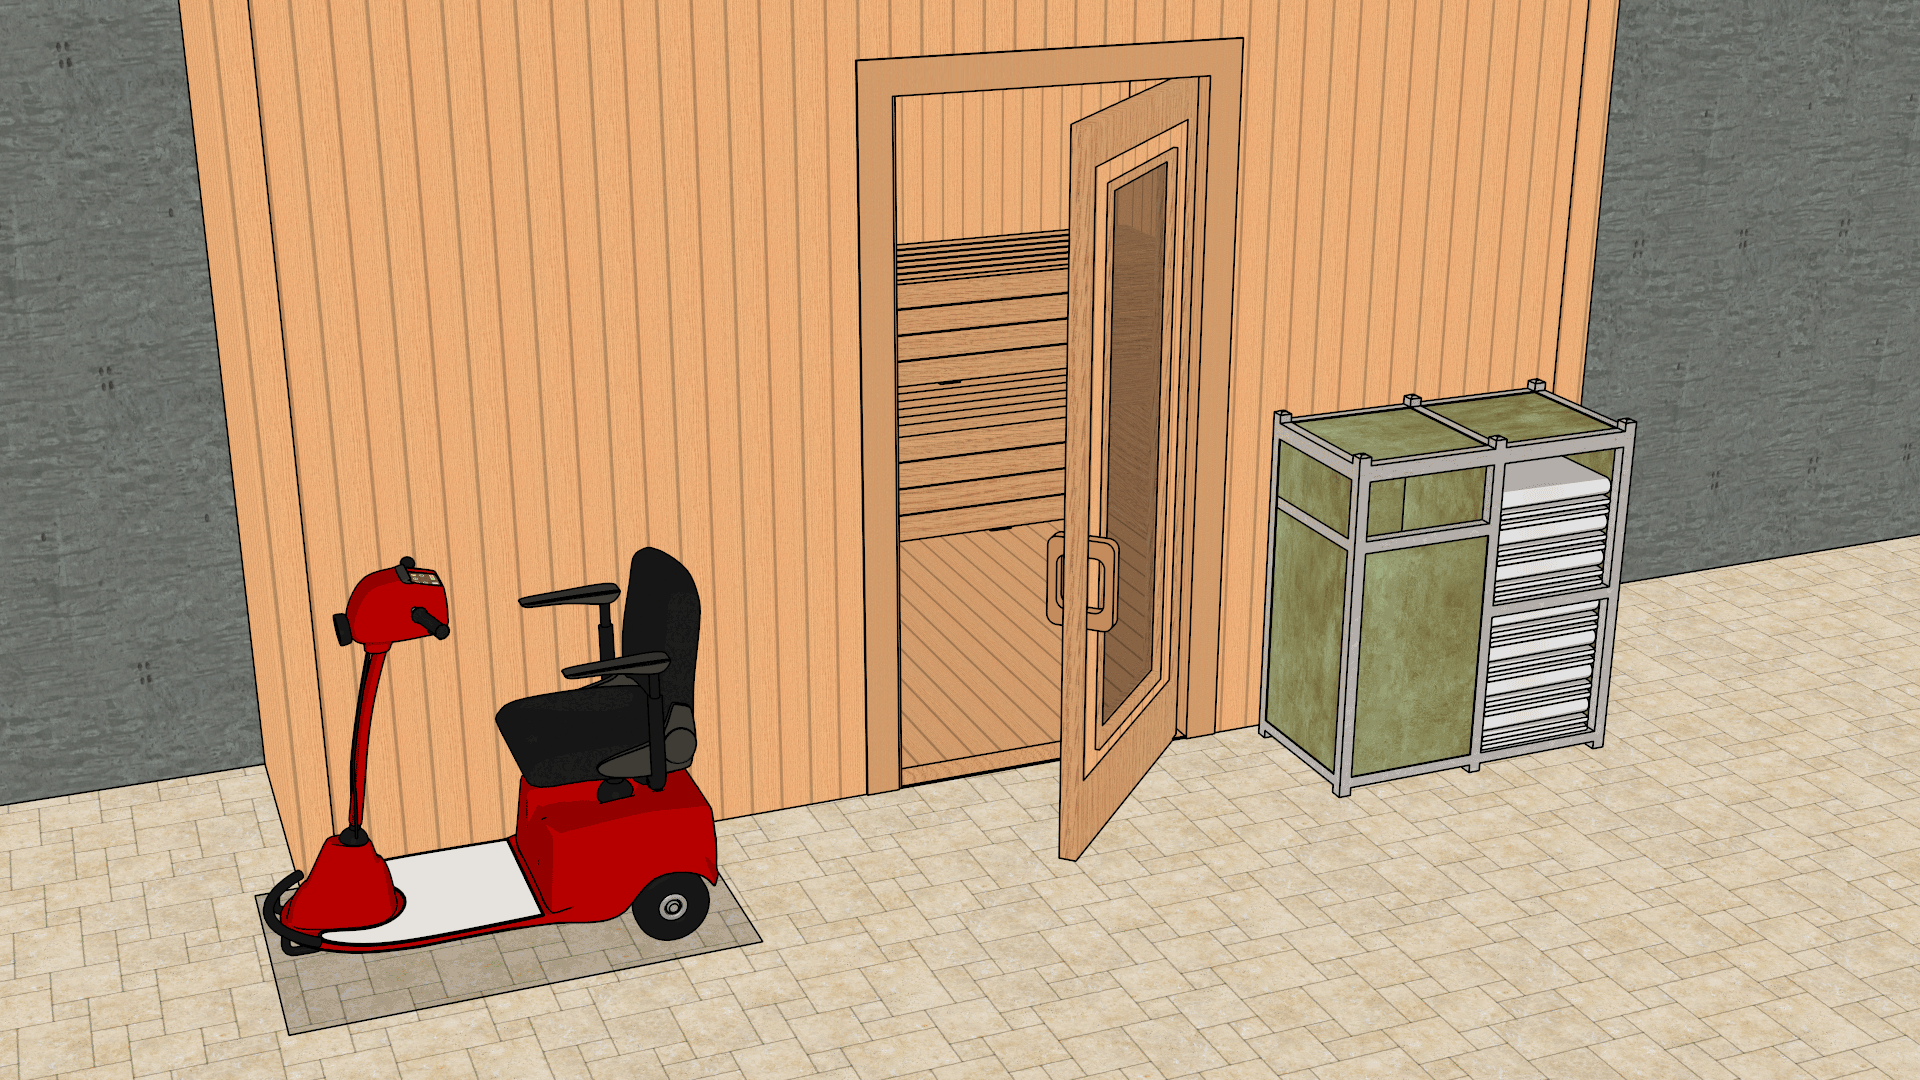 Elevated perspective view of entrance to sauna with door ajar and scooter parked to the left of the door outside of the required maneuvering space.